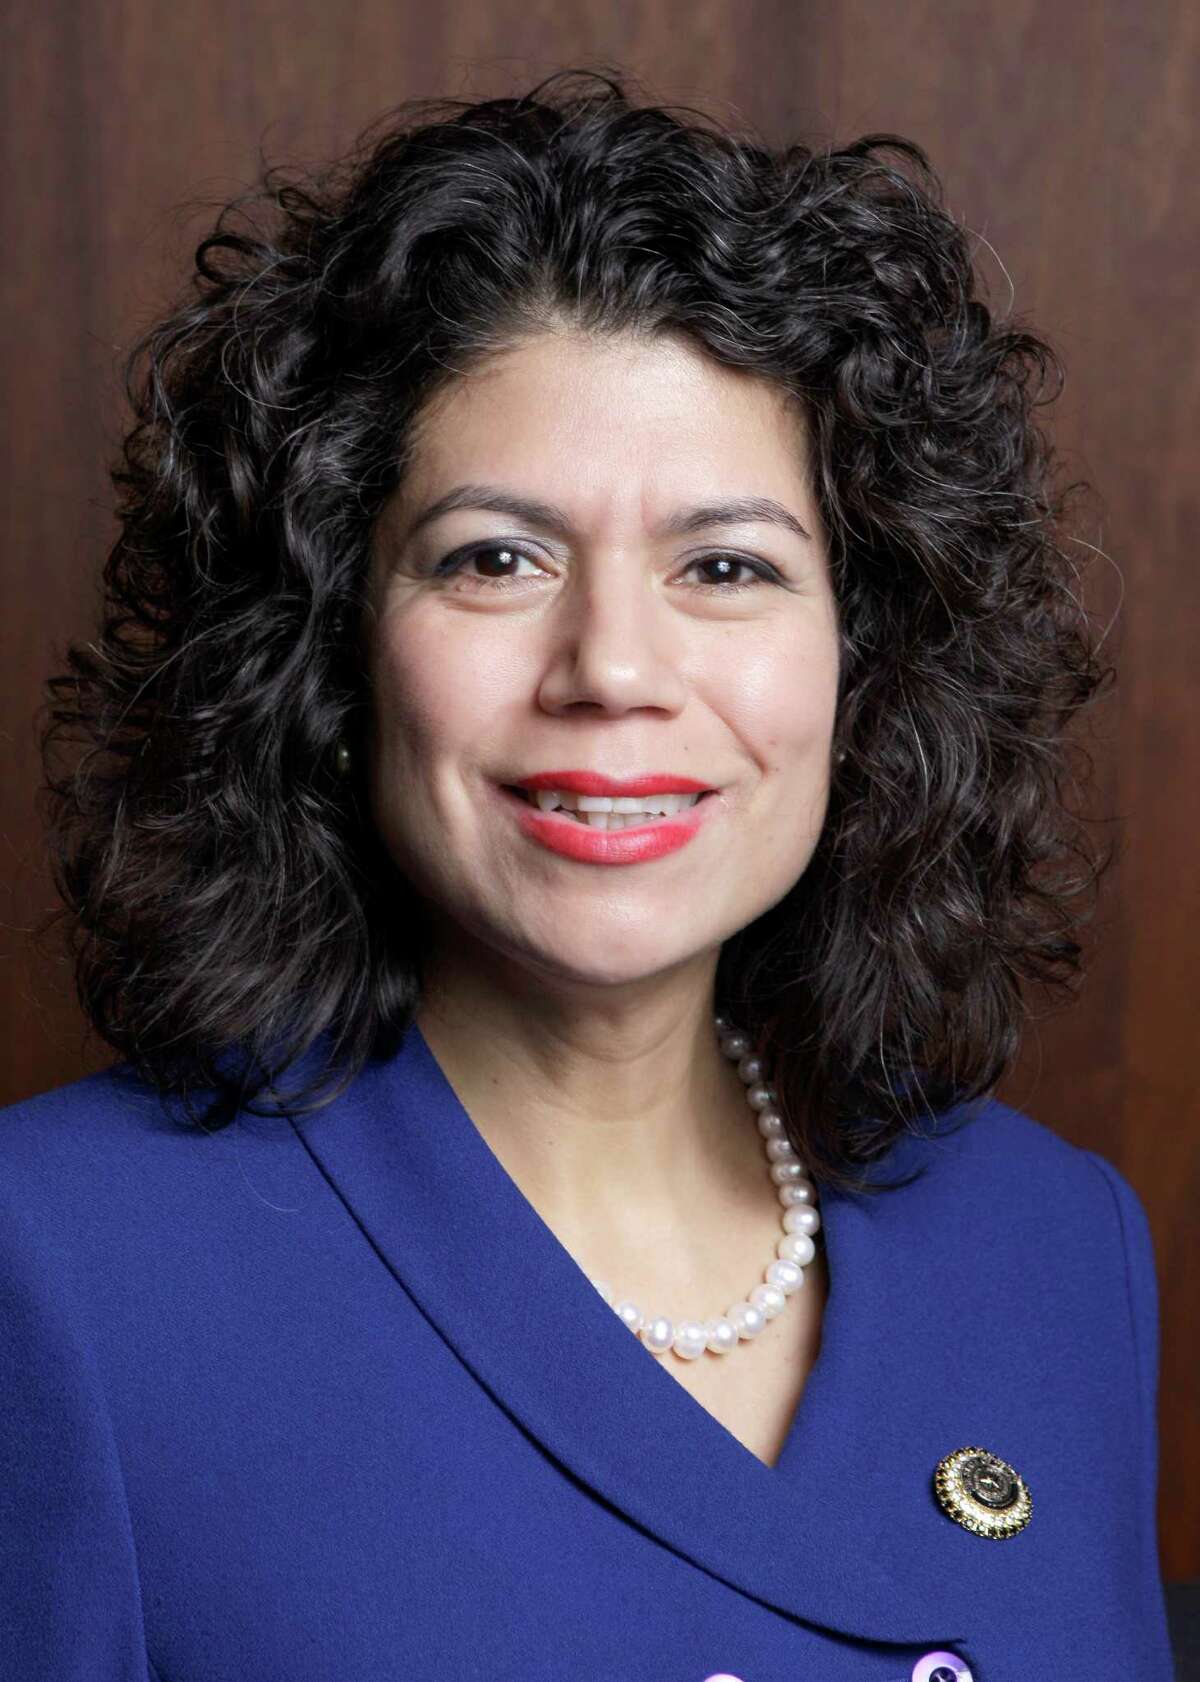 Carol Alvarado, a former Houston City Council member has represented Texas House District 145 since 2008, and says her experience would give her an edge in the Senate.